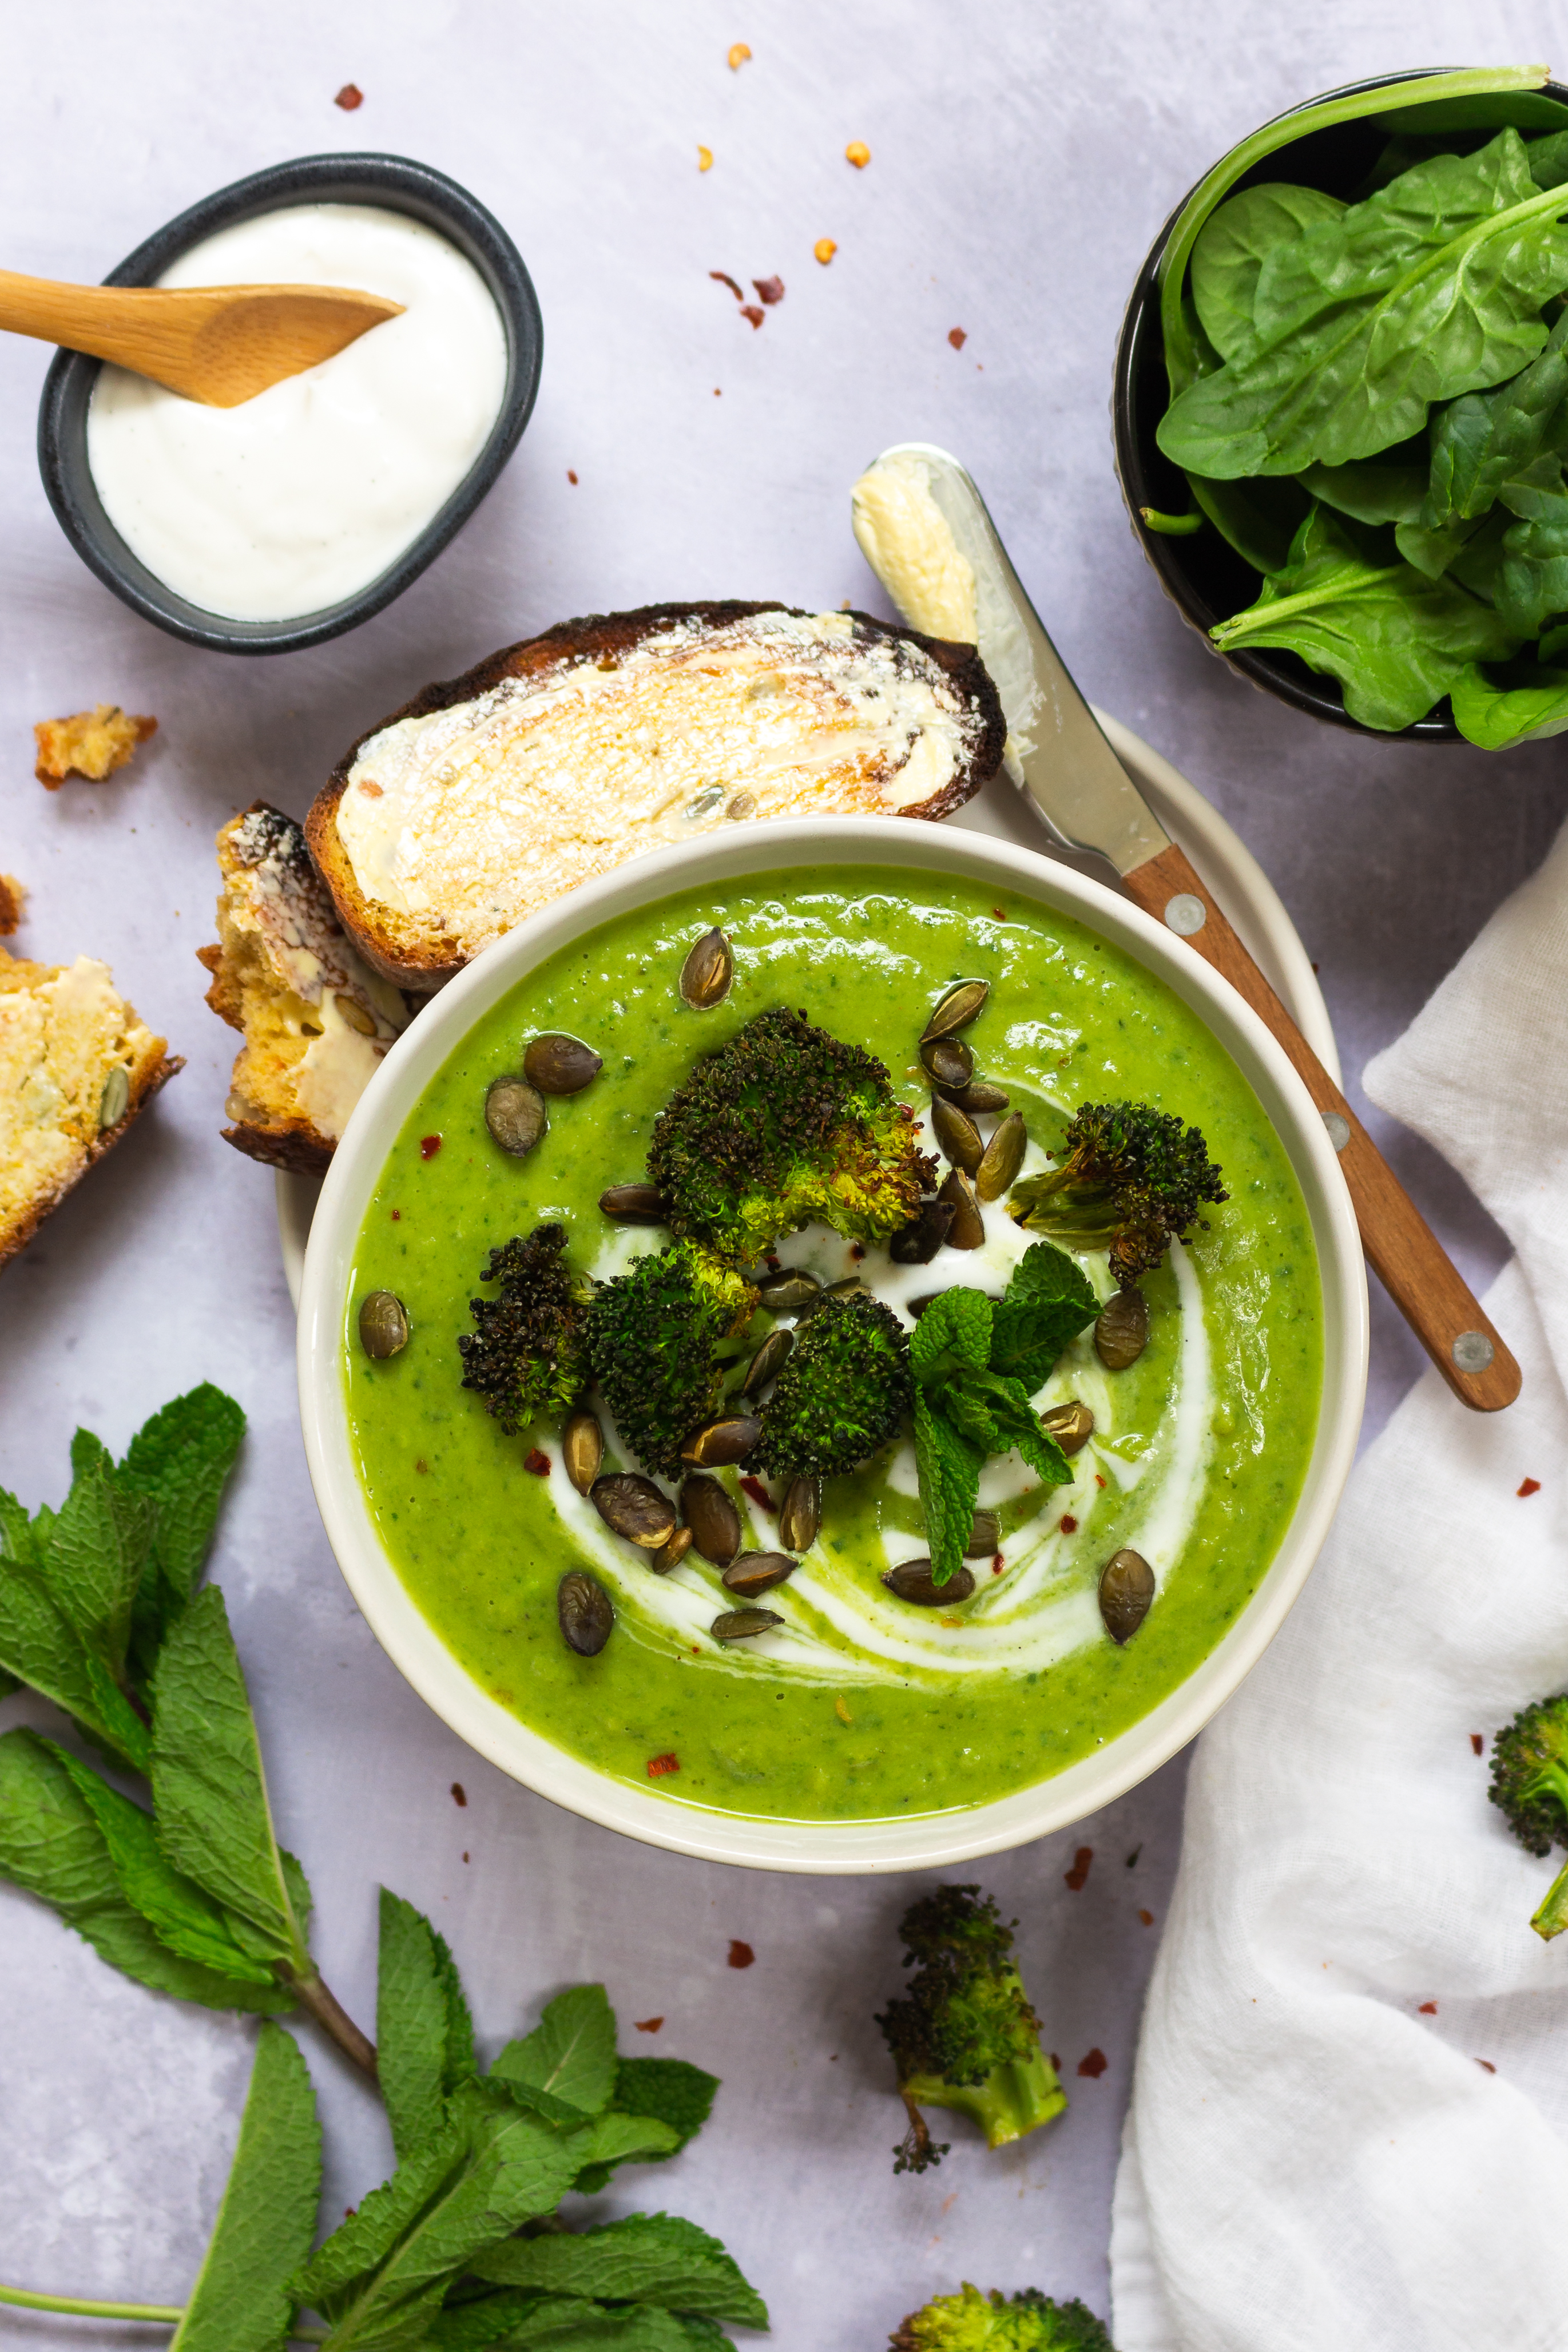 Broccoli and Pea Mint Soup with Roasted Broccoli Croutons